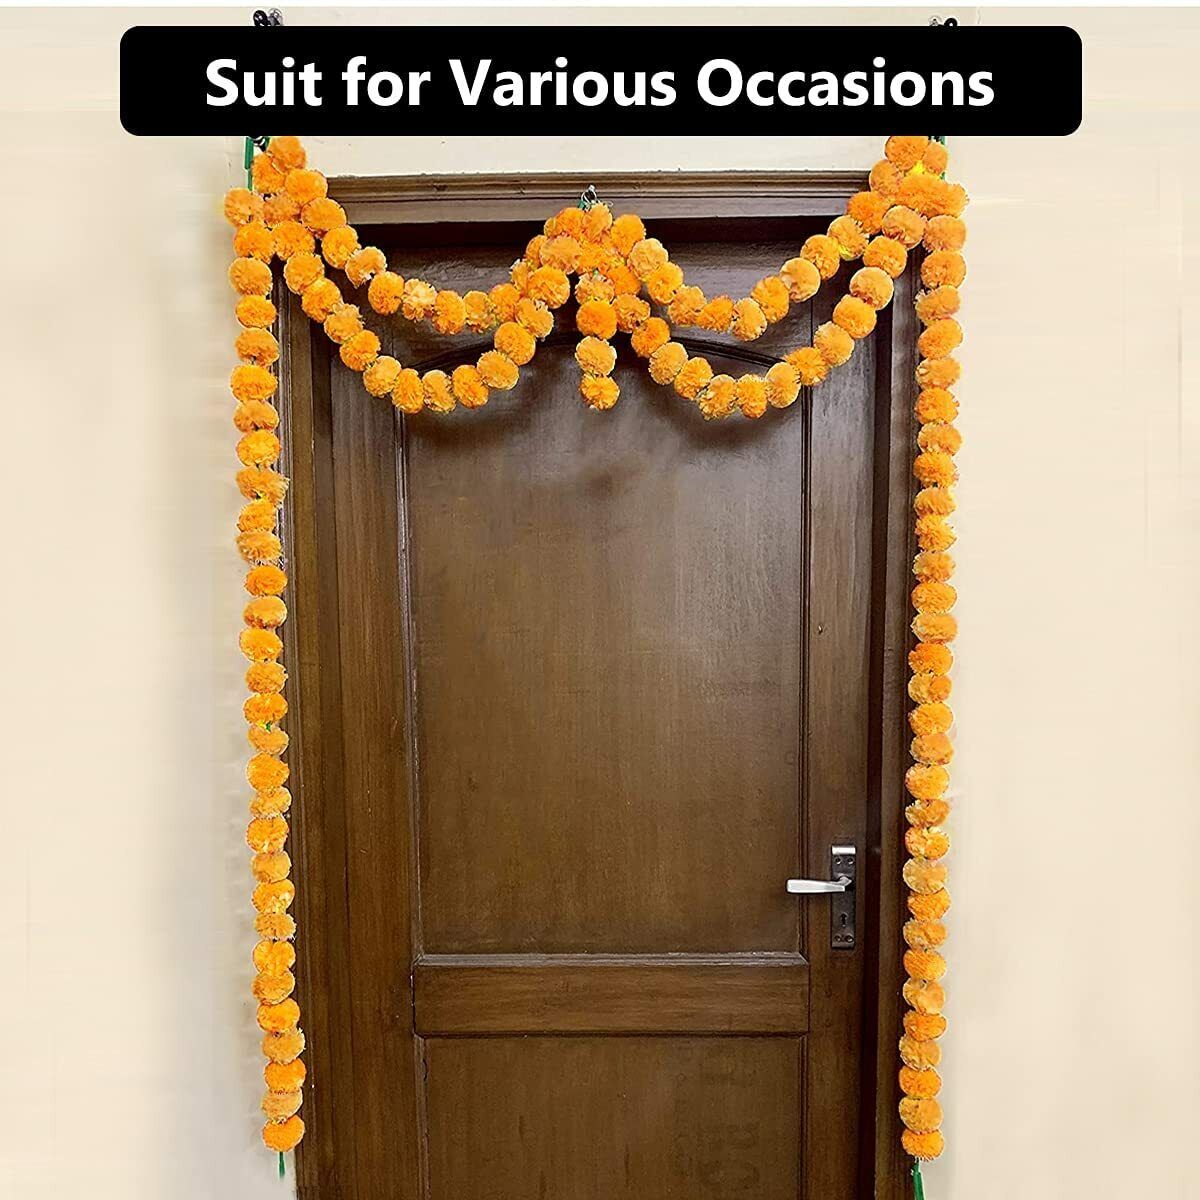 5Pack Marigold Garlands 5ft Artificial Marigold Flower Garland For Pooja/Puja TQS Does not apply - фотография #10